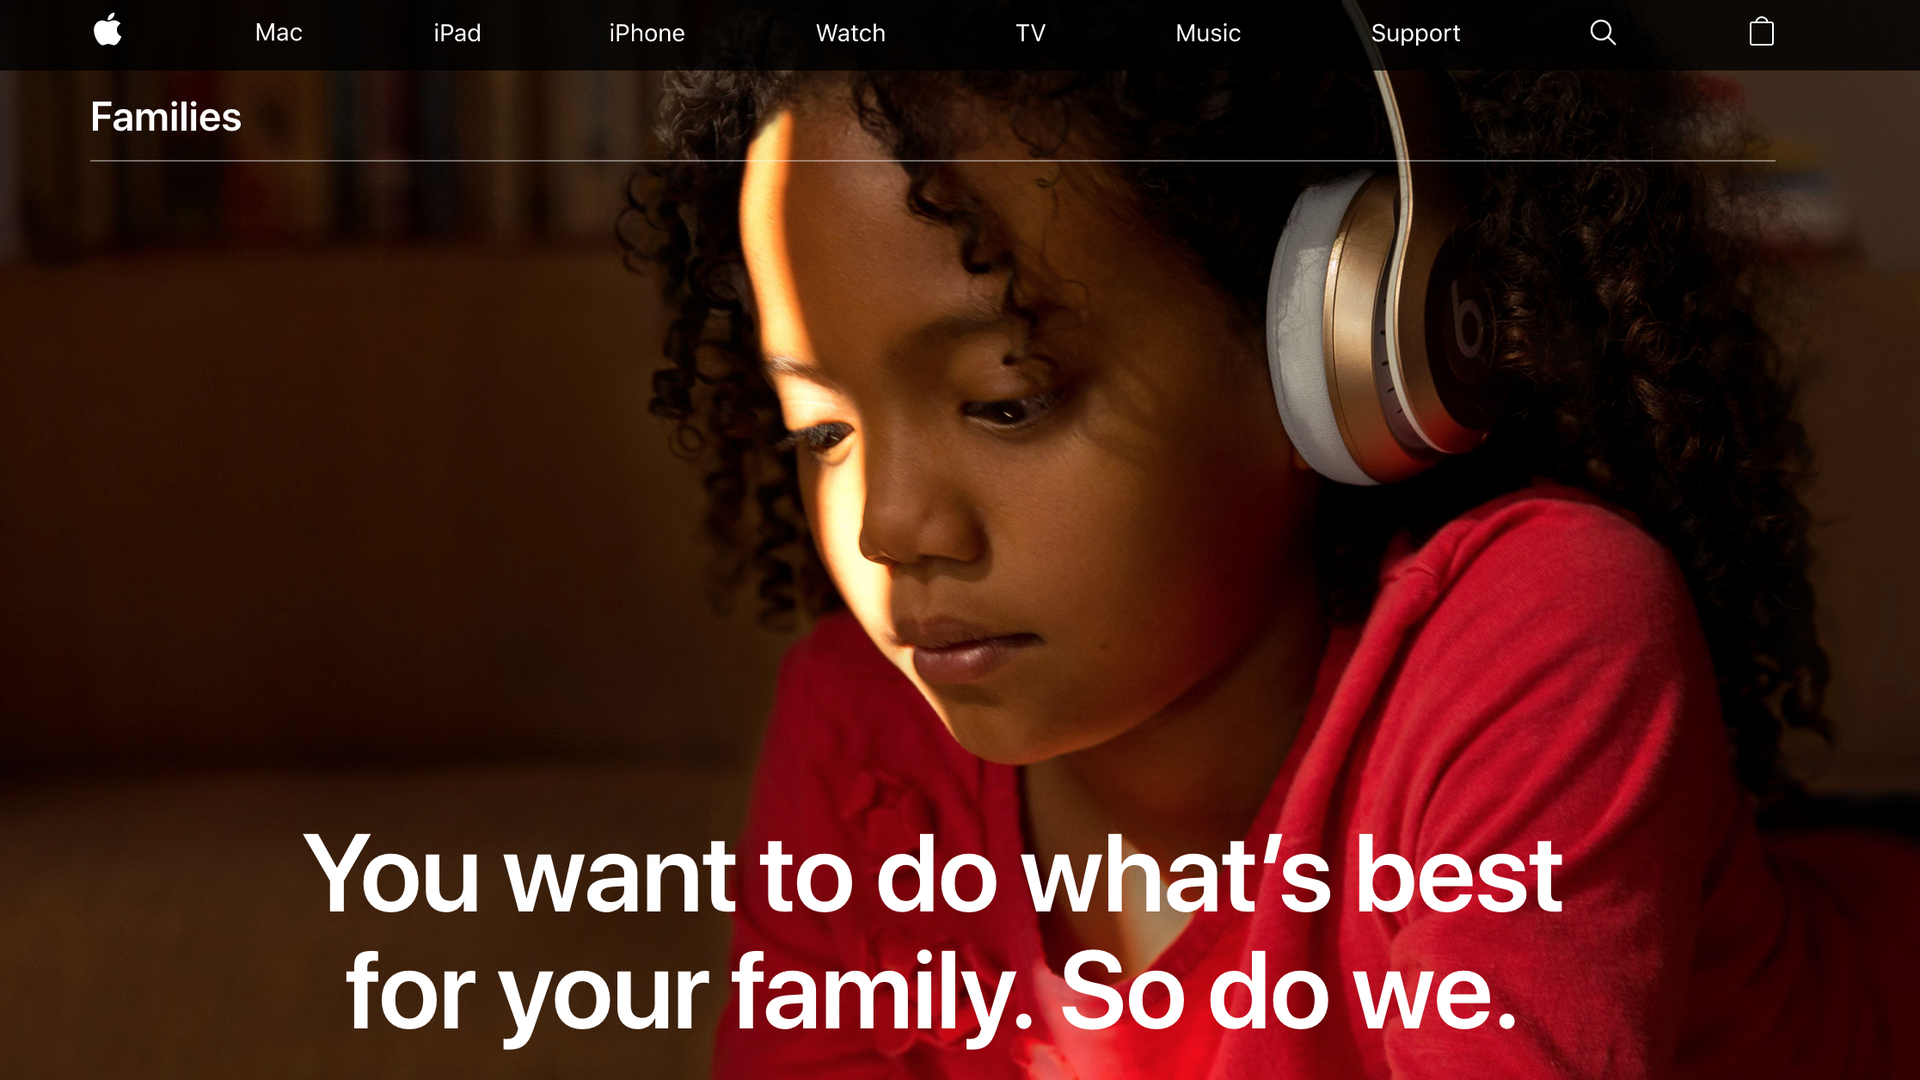 Apple's page for families